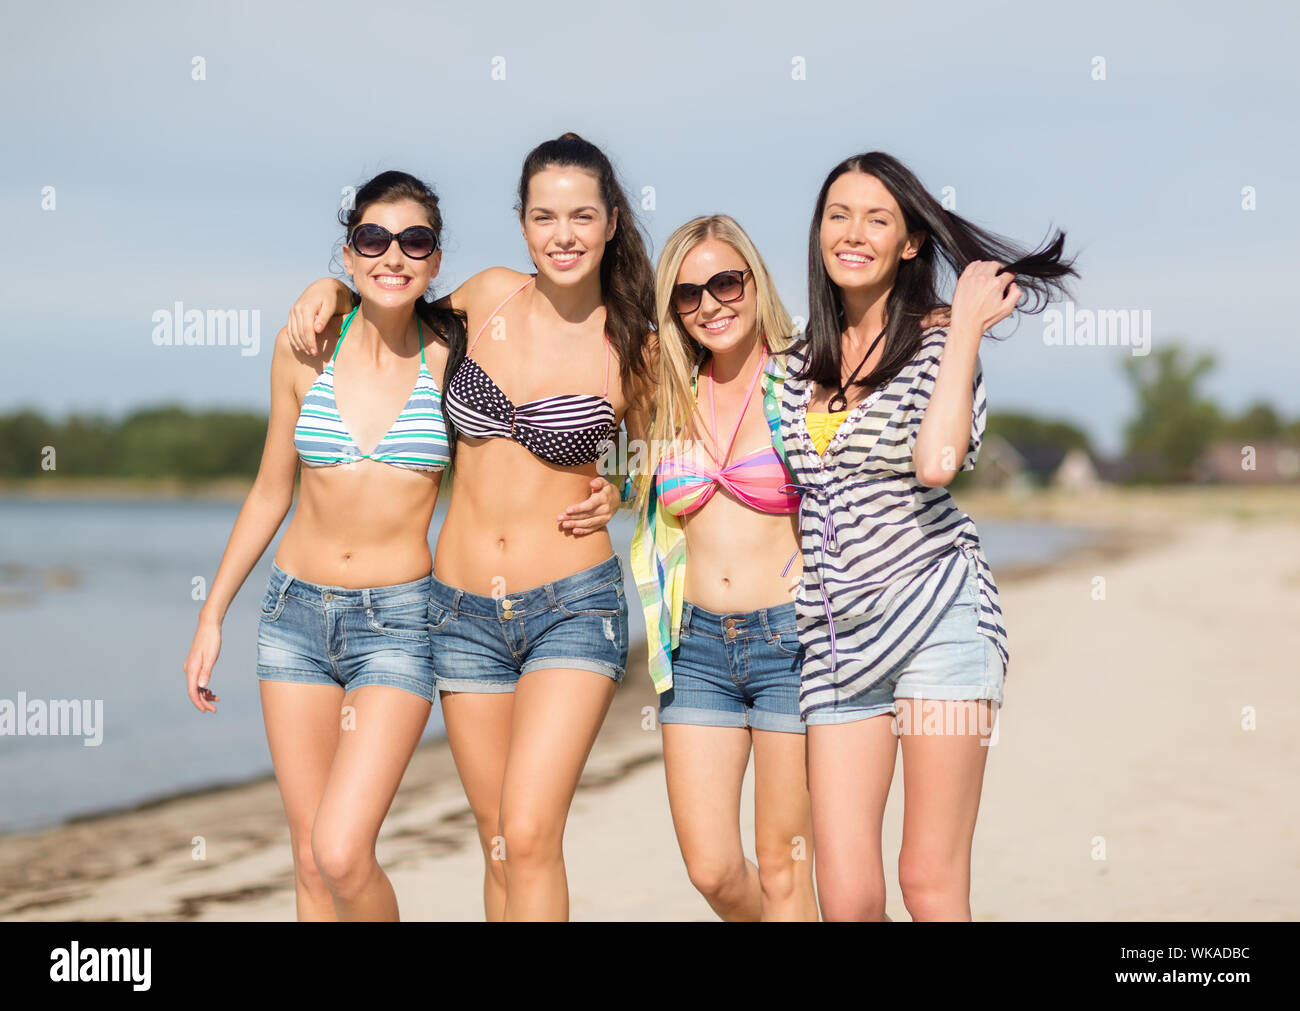 Girls In Bikinis High Resolution Stock Photography and Images - Alamy